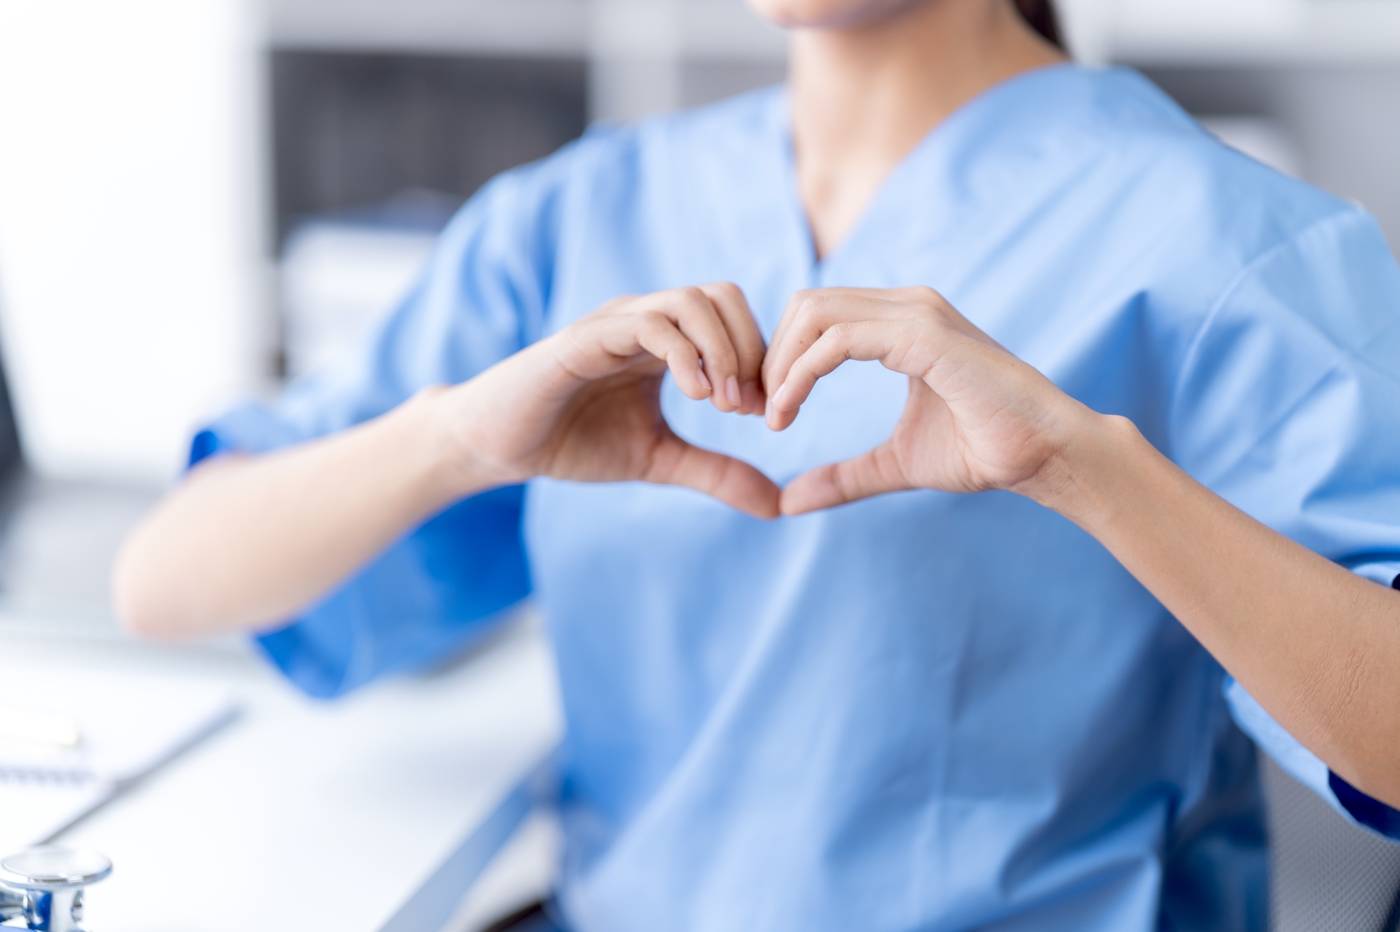 Nurse with hands together to gesture the shape of a heart